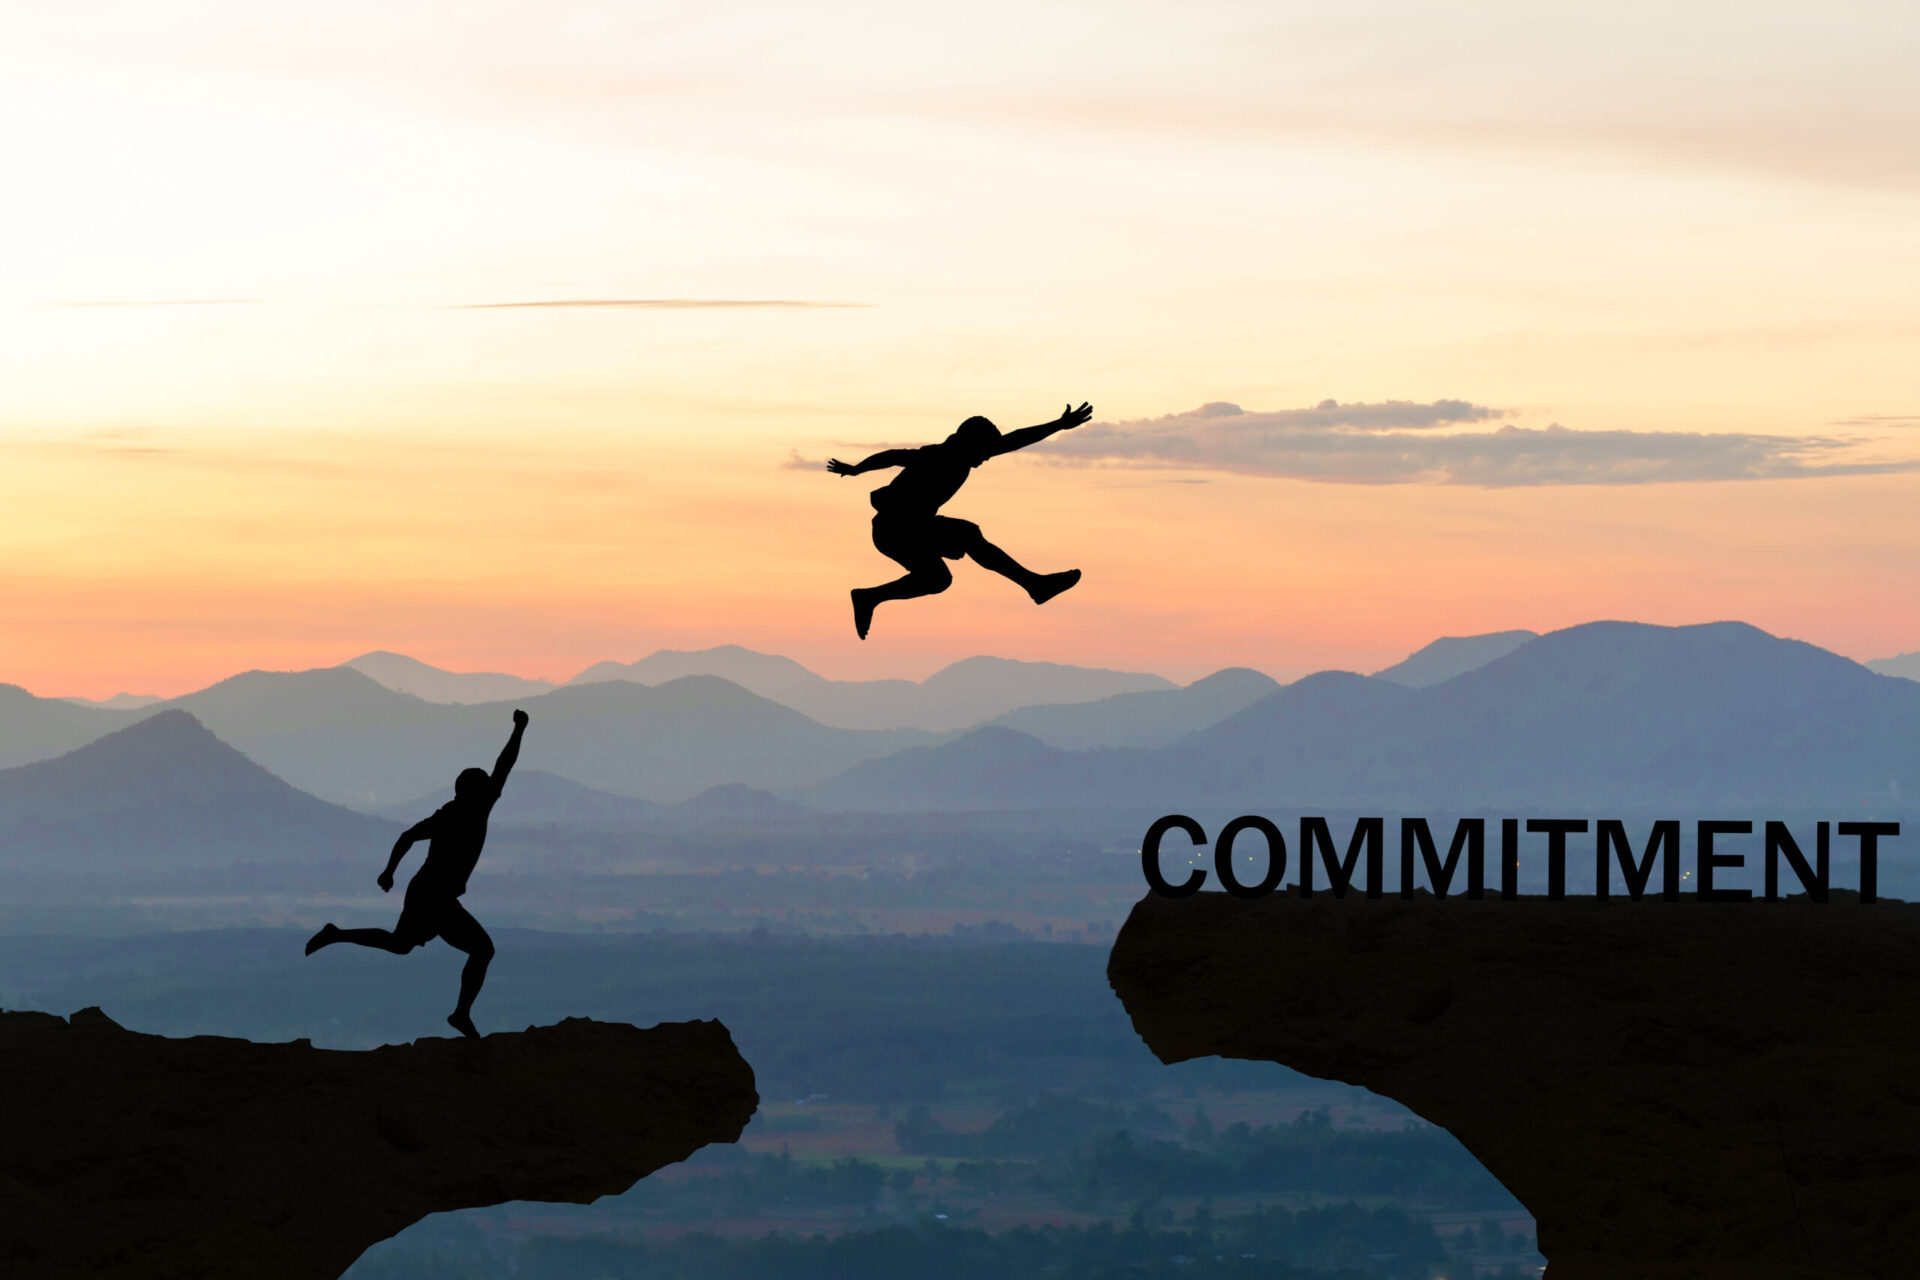 Photo of people jumping to 'commitment'